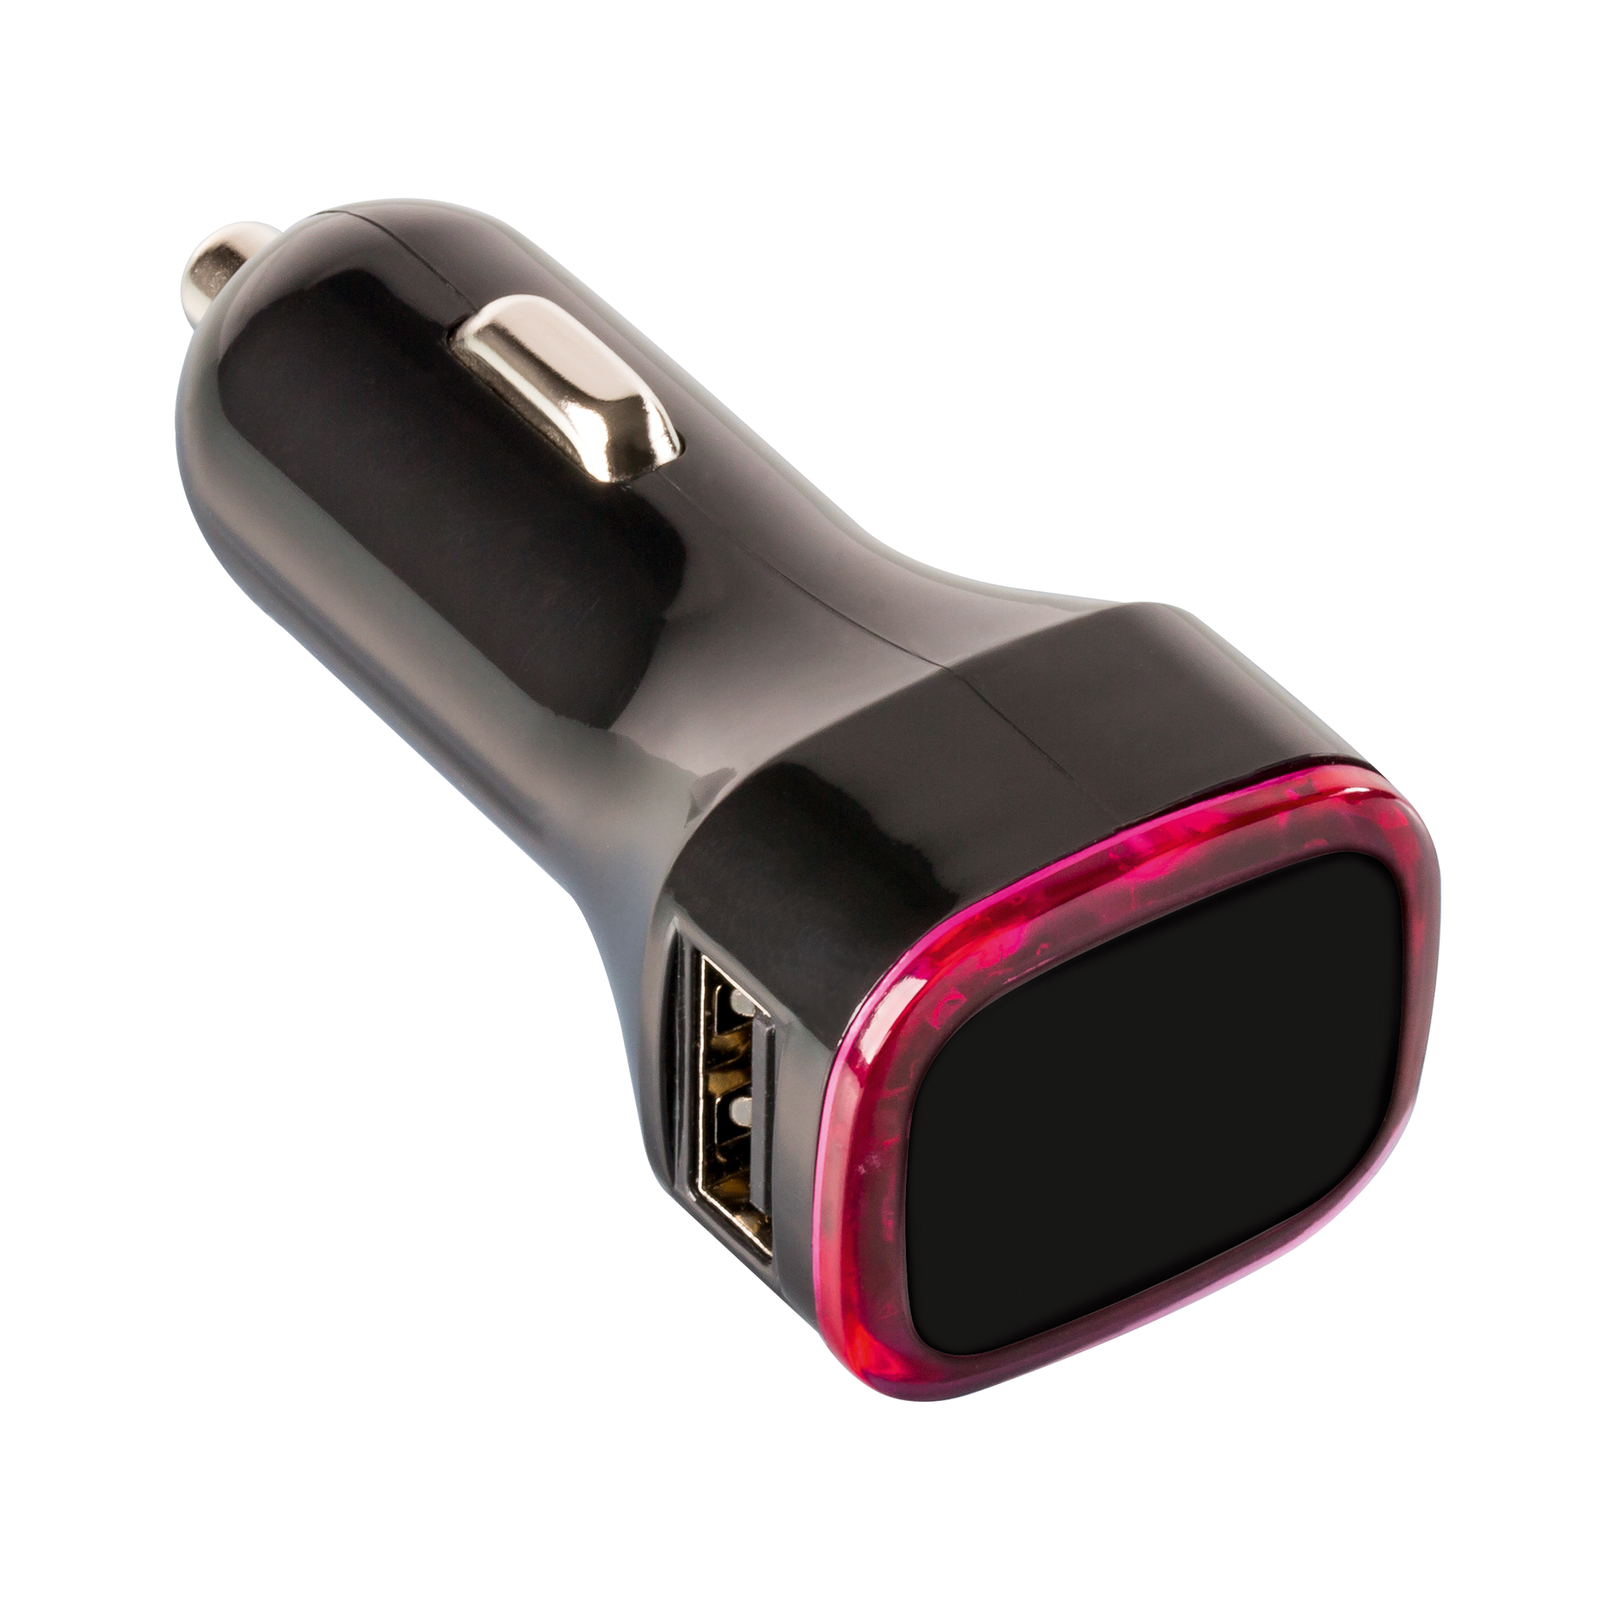 Business USB car charger adapter RC 500